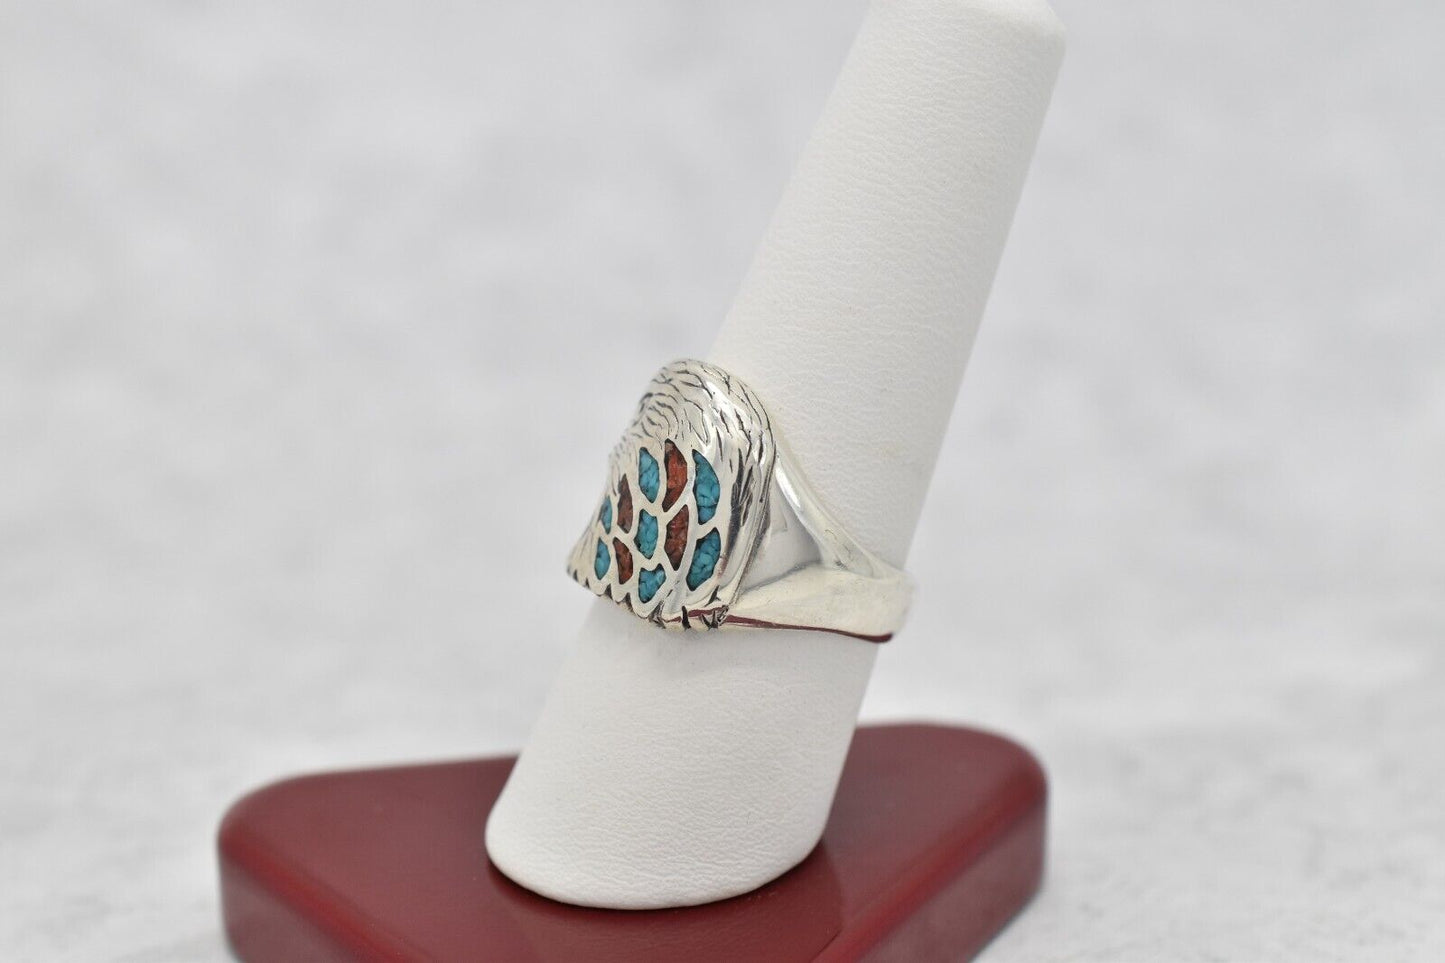 Sterling Silver Turquoise & Coral Eagle Ring, Size 8.75 - 9.2g